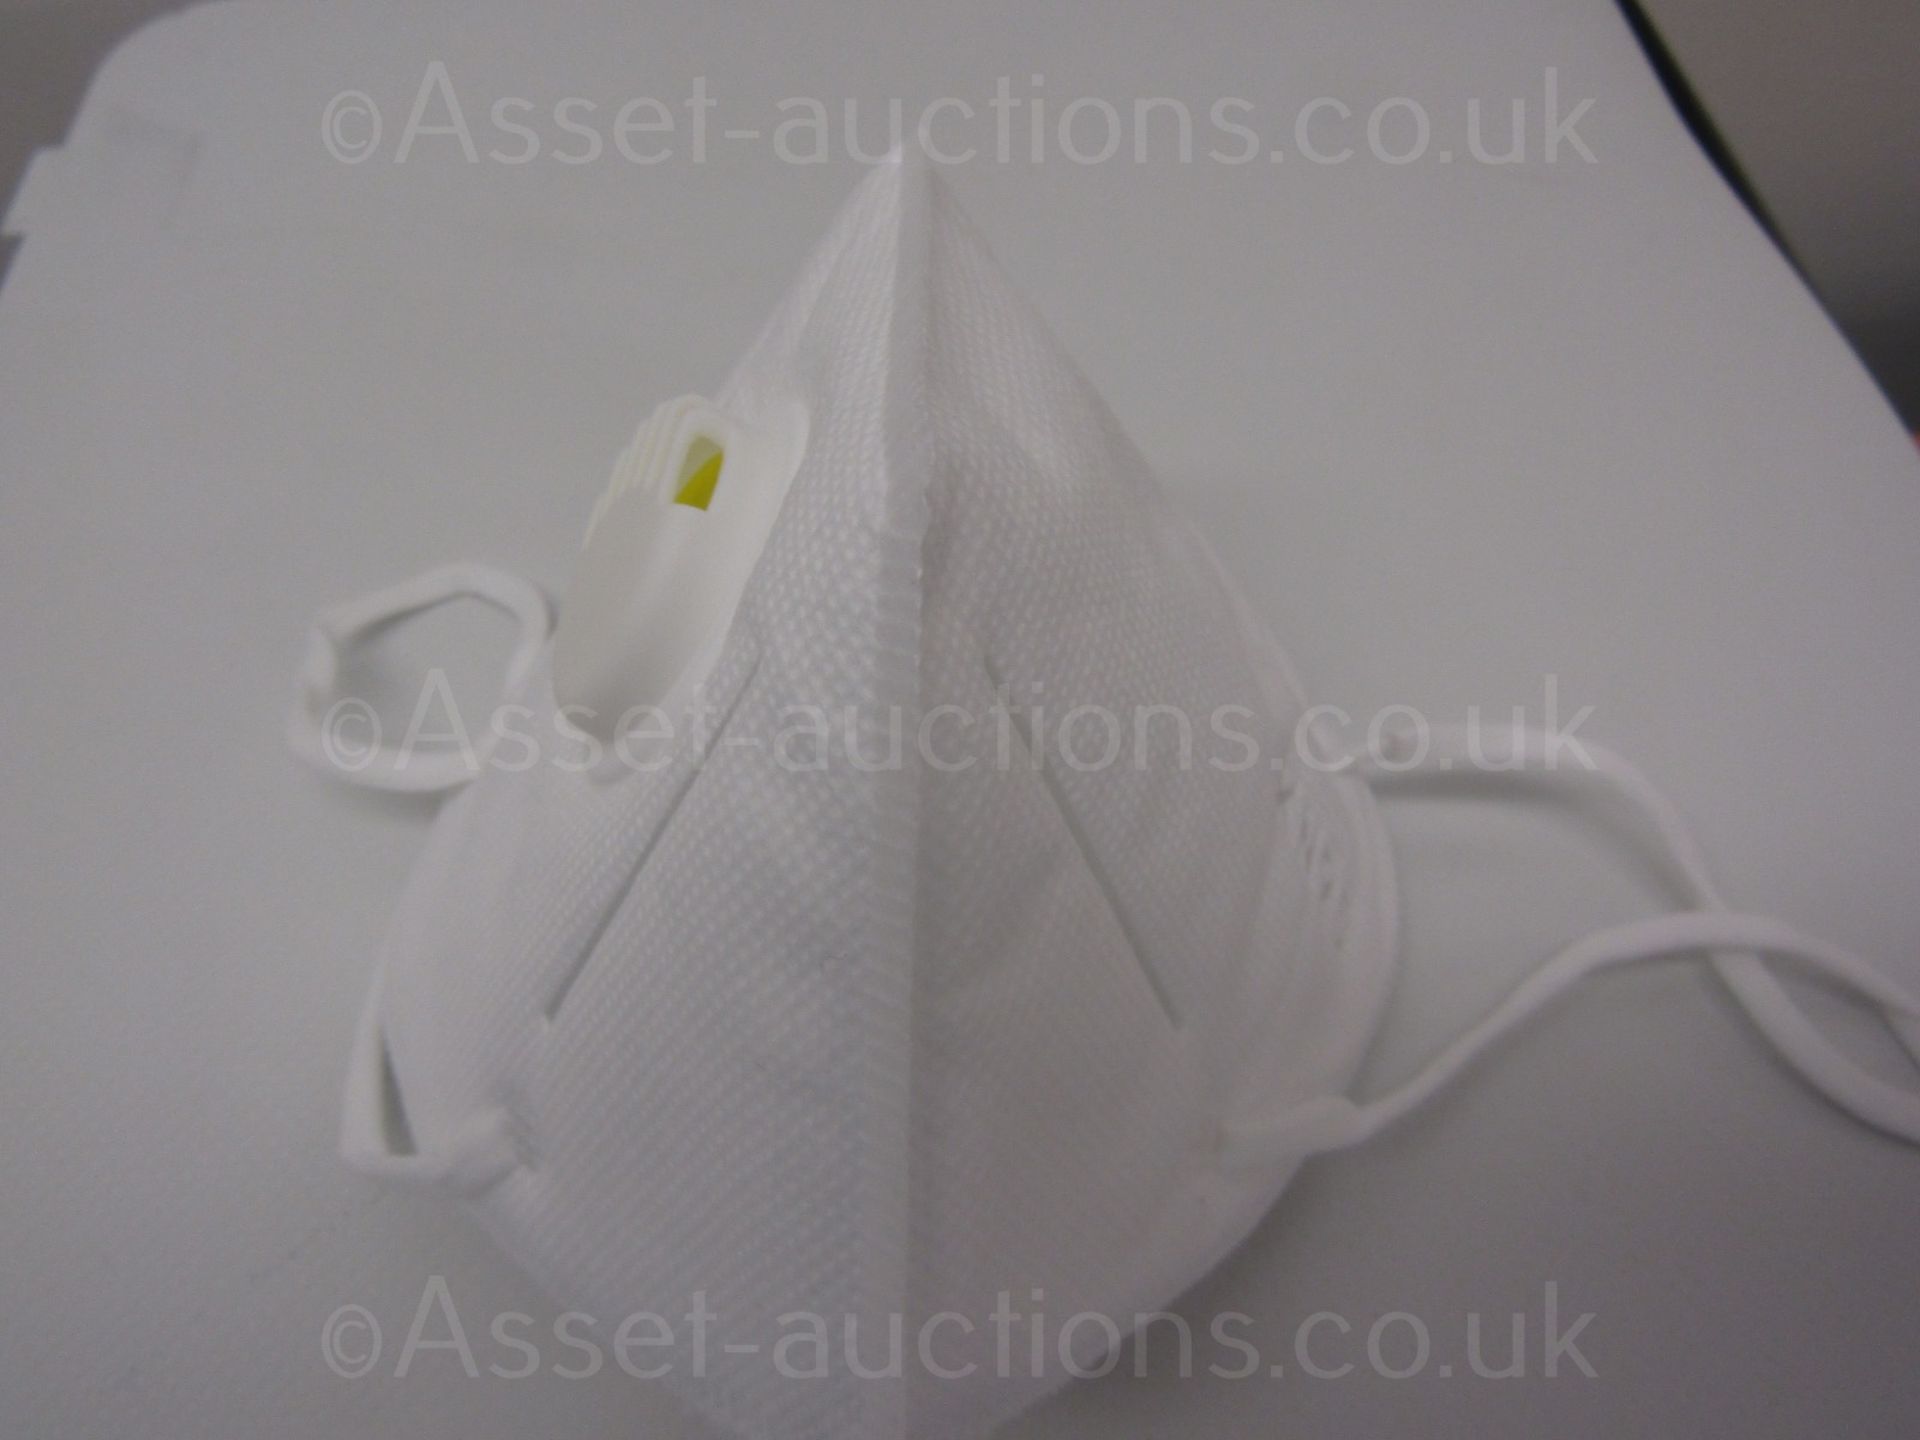 5000 KN95 FILTERED FACE MASKS, BRAND NEW WITH TAGS AND CE MARK CERTIFIED *PLUS VAT* - Image 4 of 7